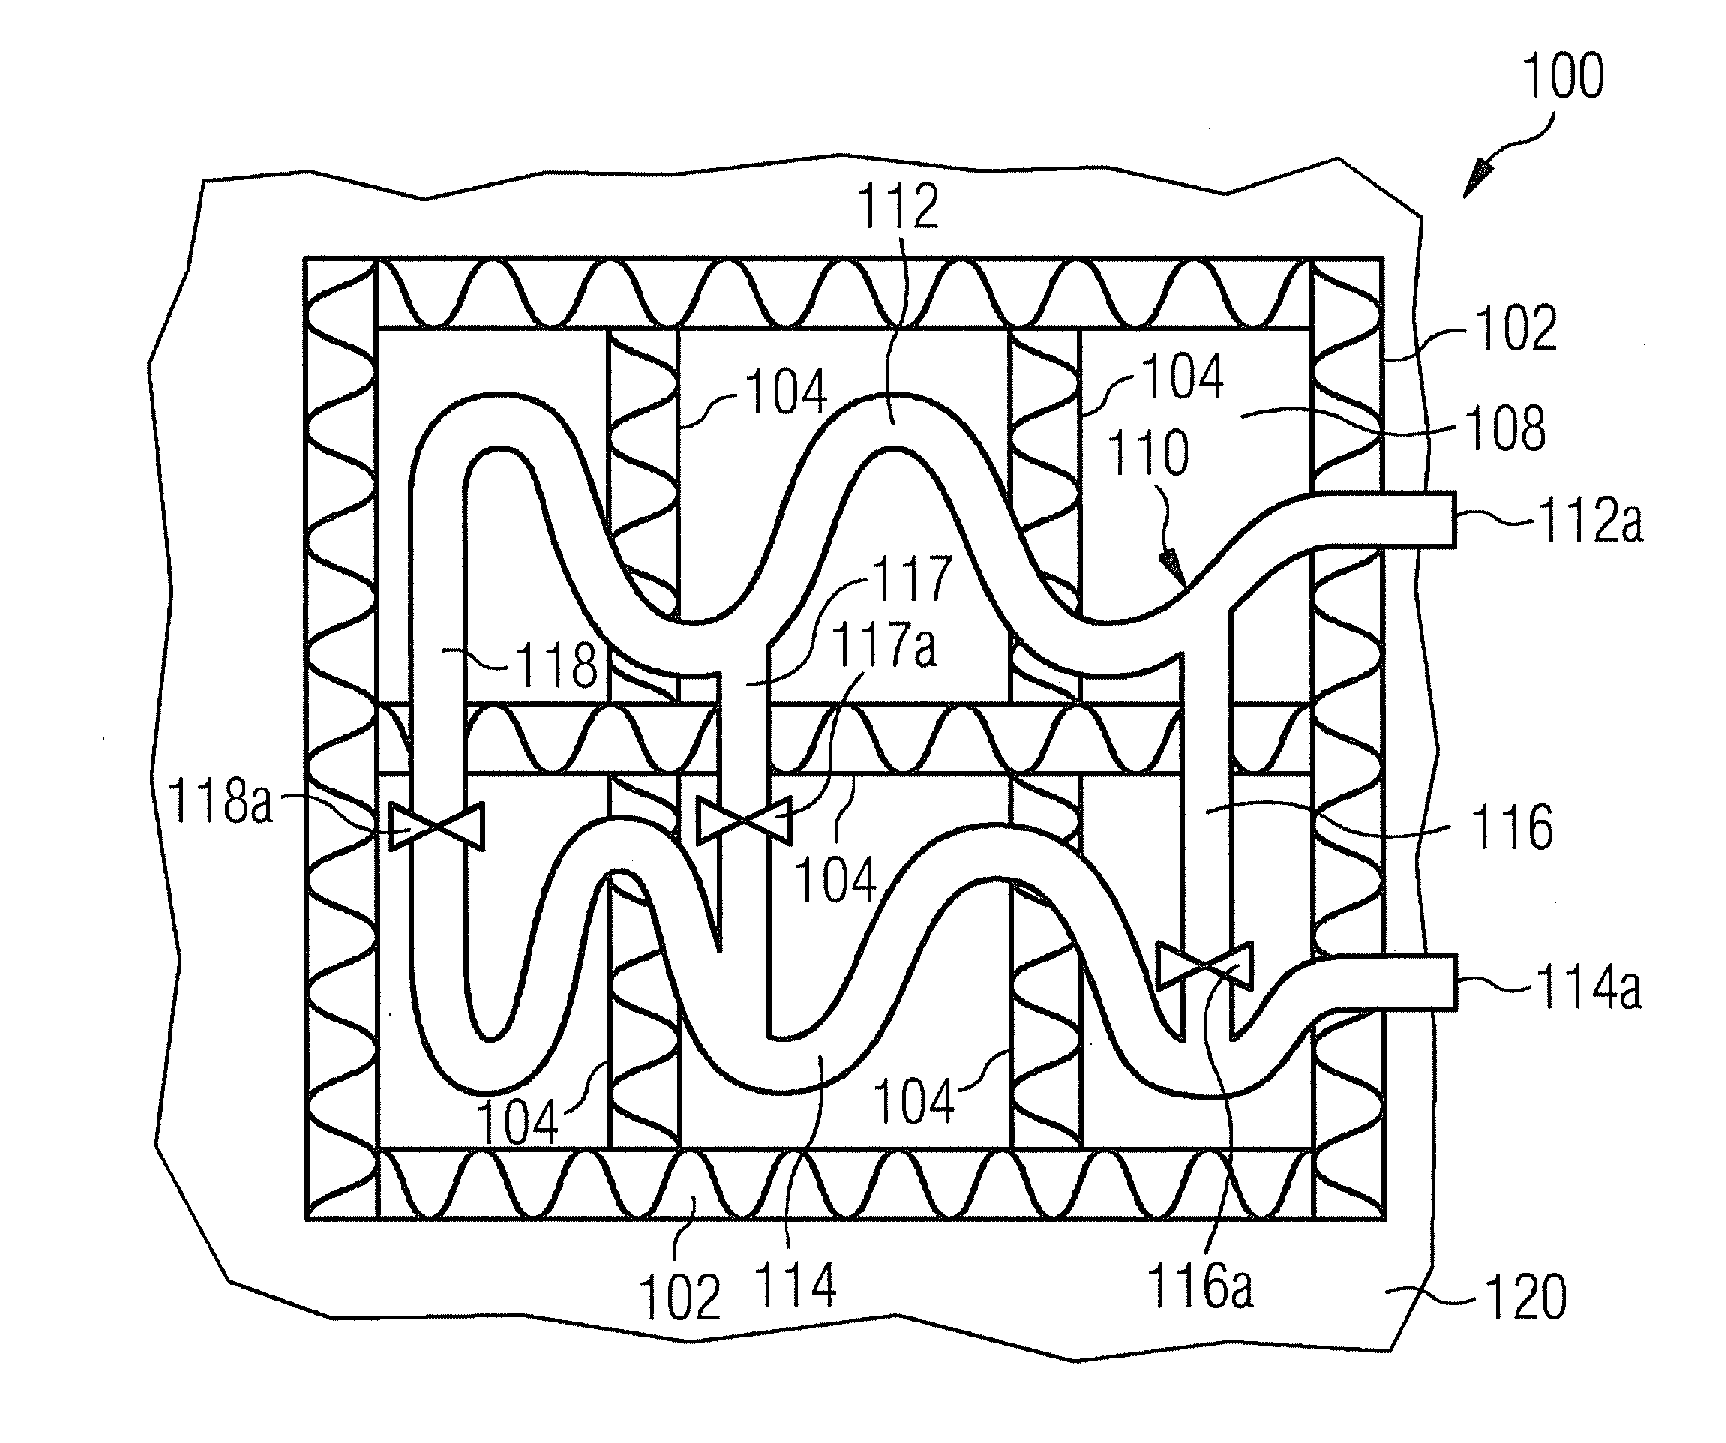 Thermal energy storage and recovery with a heat exchanger arrangement having an extended thermal interaction region